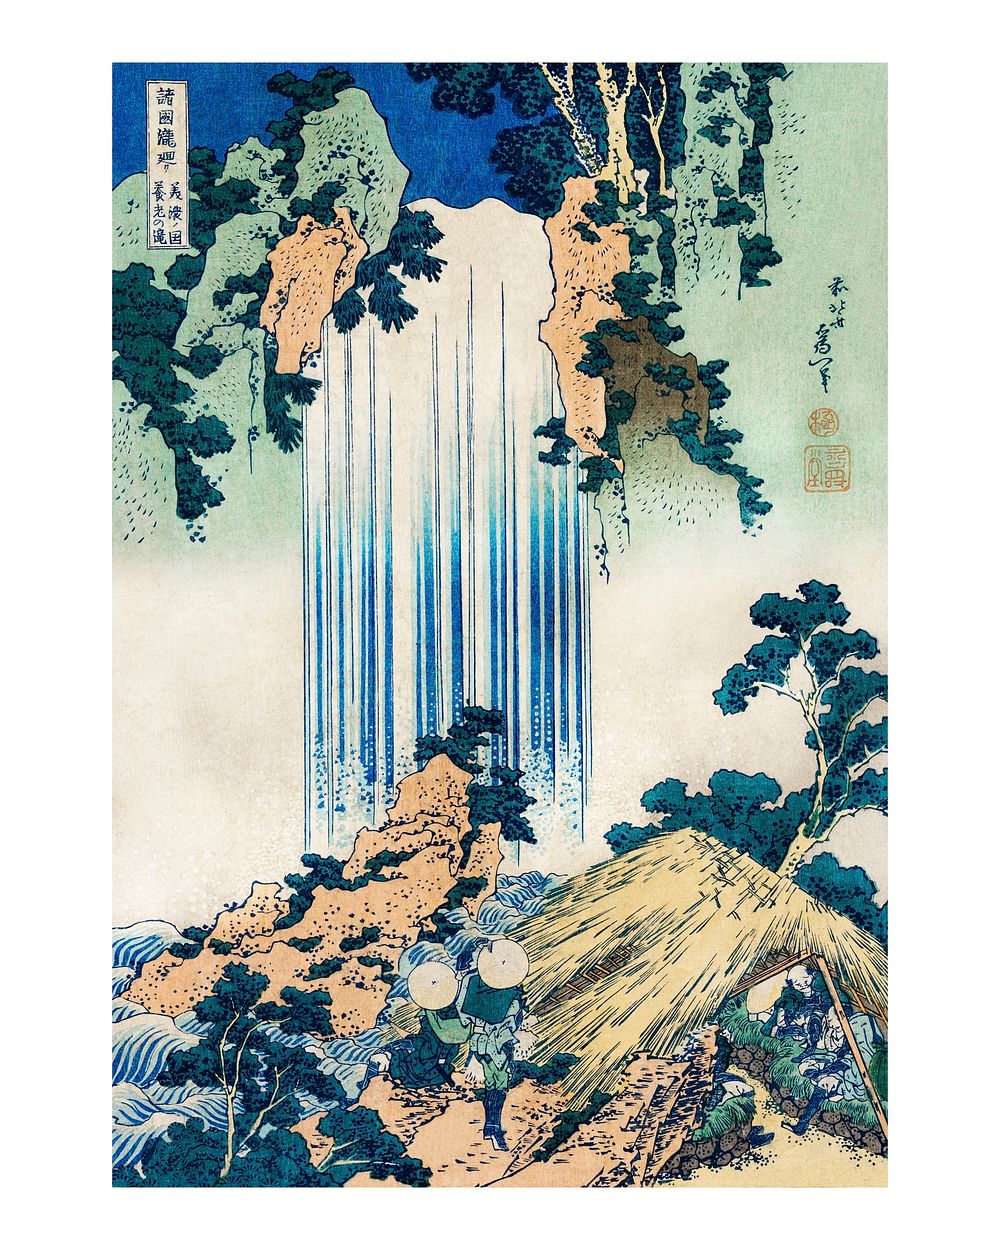 Two travelers at a waterfall vintage illustration wall art print and poster design remix from the original artwork by…